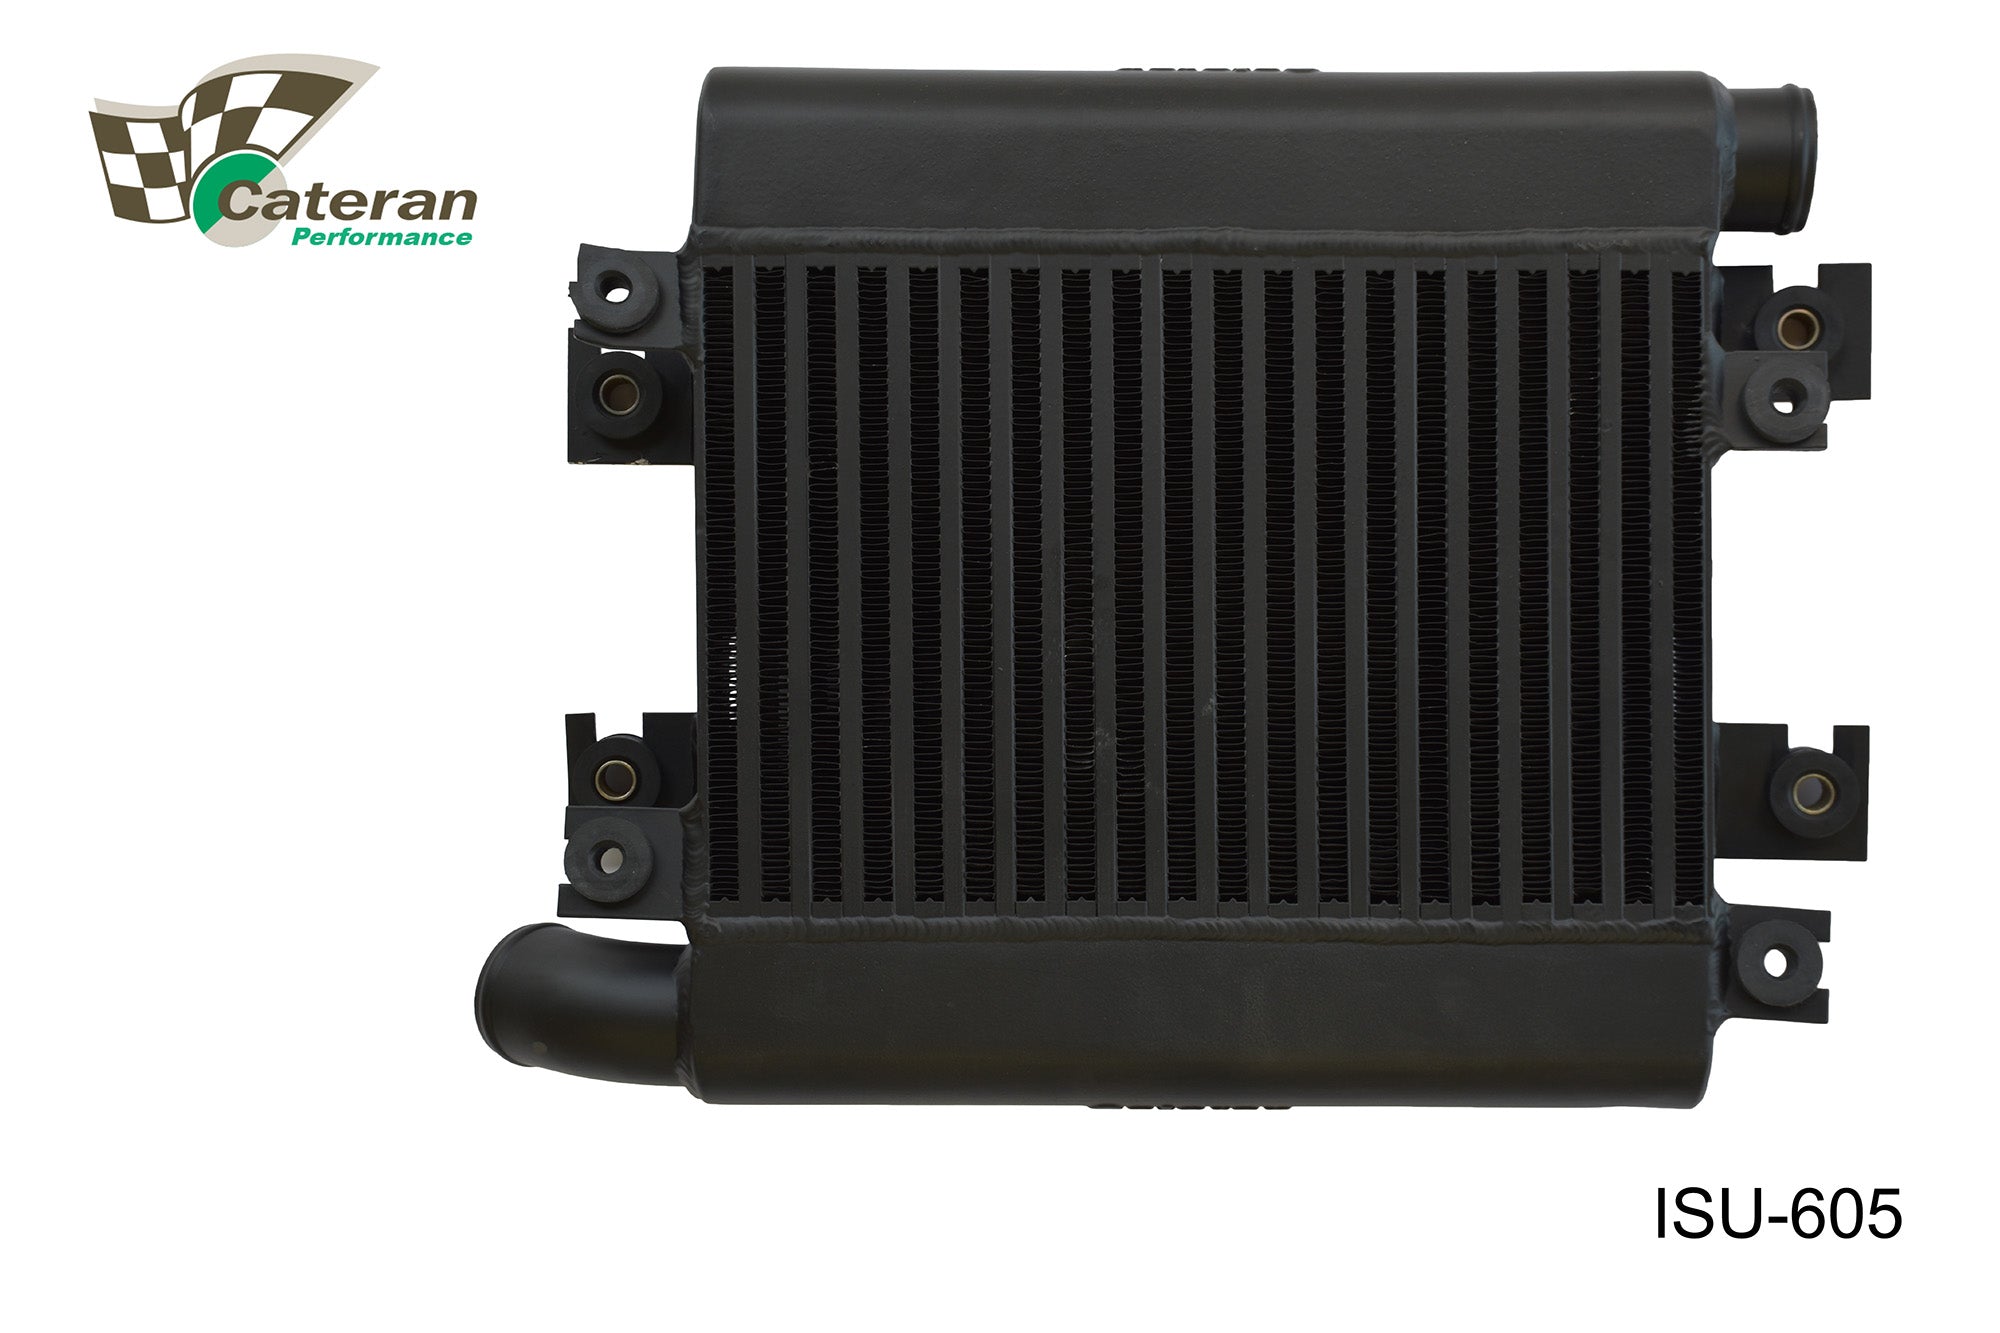 ISUZU HOLDEN DMAX COL. RC 4JJ1-T 3.0L 4cyl UTE ALL 07 to 12 - INTERCOOLER